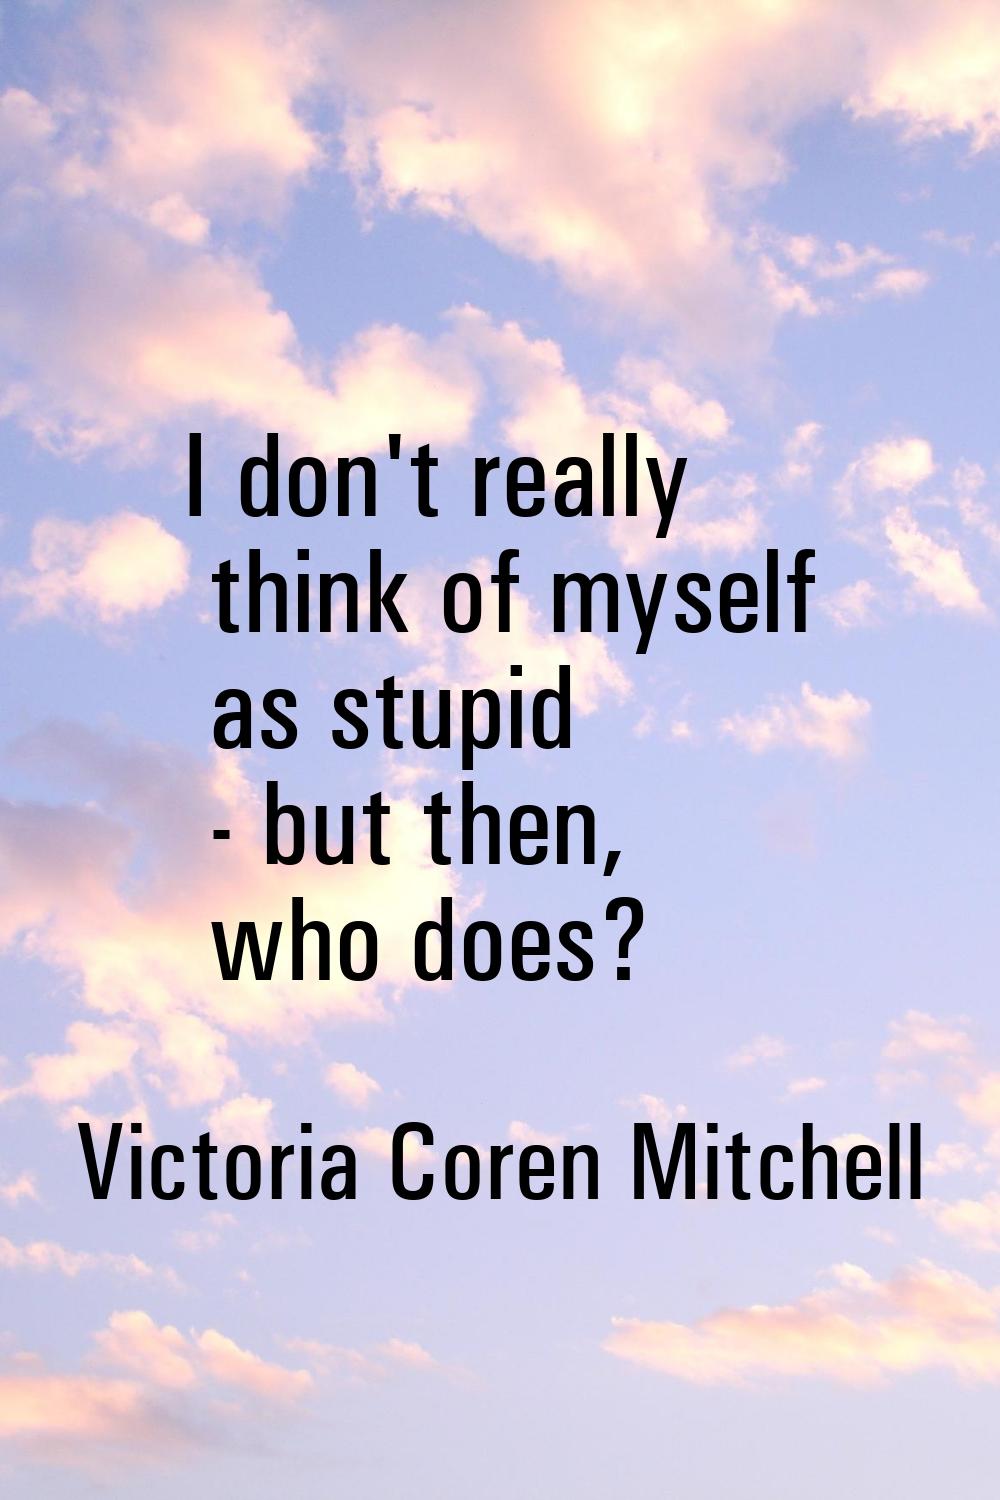 I don't really think of myself as stupid - but then, who does?